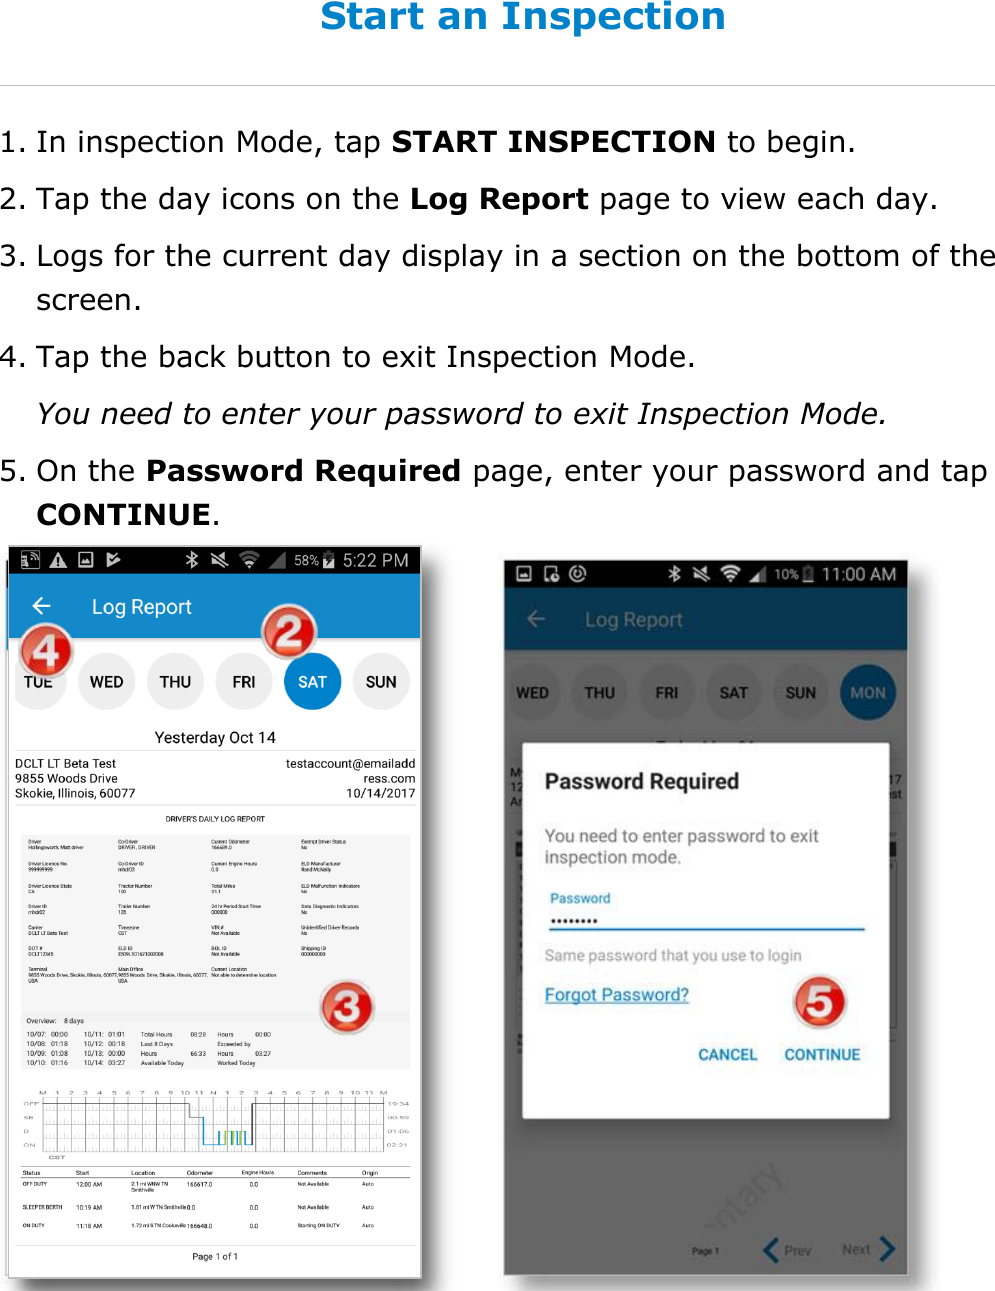 Use Inspection Mode DriverConnect User Guide  61 © 2017, Rand McNally, Inc. Start an Inspection 1. In inspection Mode, tap START INSPECTION to begin. 2. Tap the day icons on the Log Report page to view each day. 3. Logs for the current day display in a section on the bottom of the screen. 4. Tap the back button to exit Inspection Mode.  You need to enter your password to exit Inspection Mode. 5. On the Password Required page, enter your password and tap CONTINUE.   